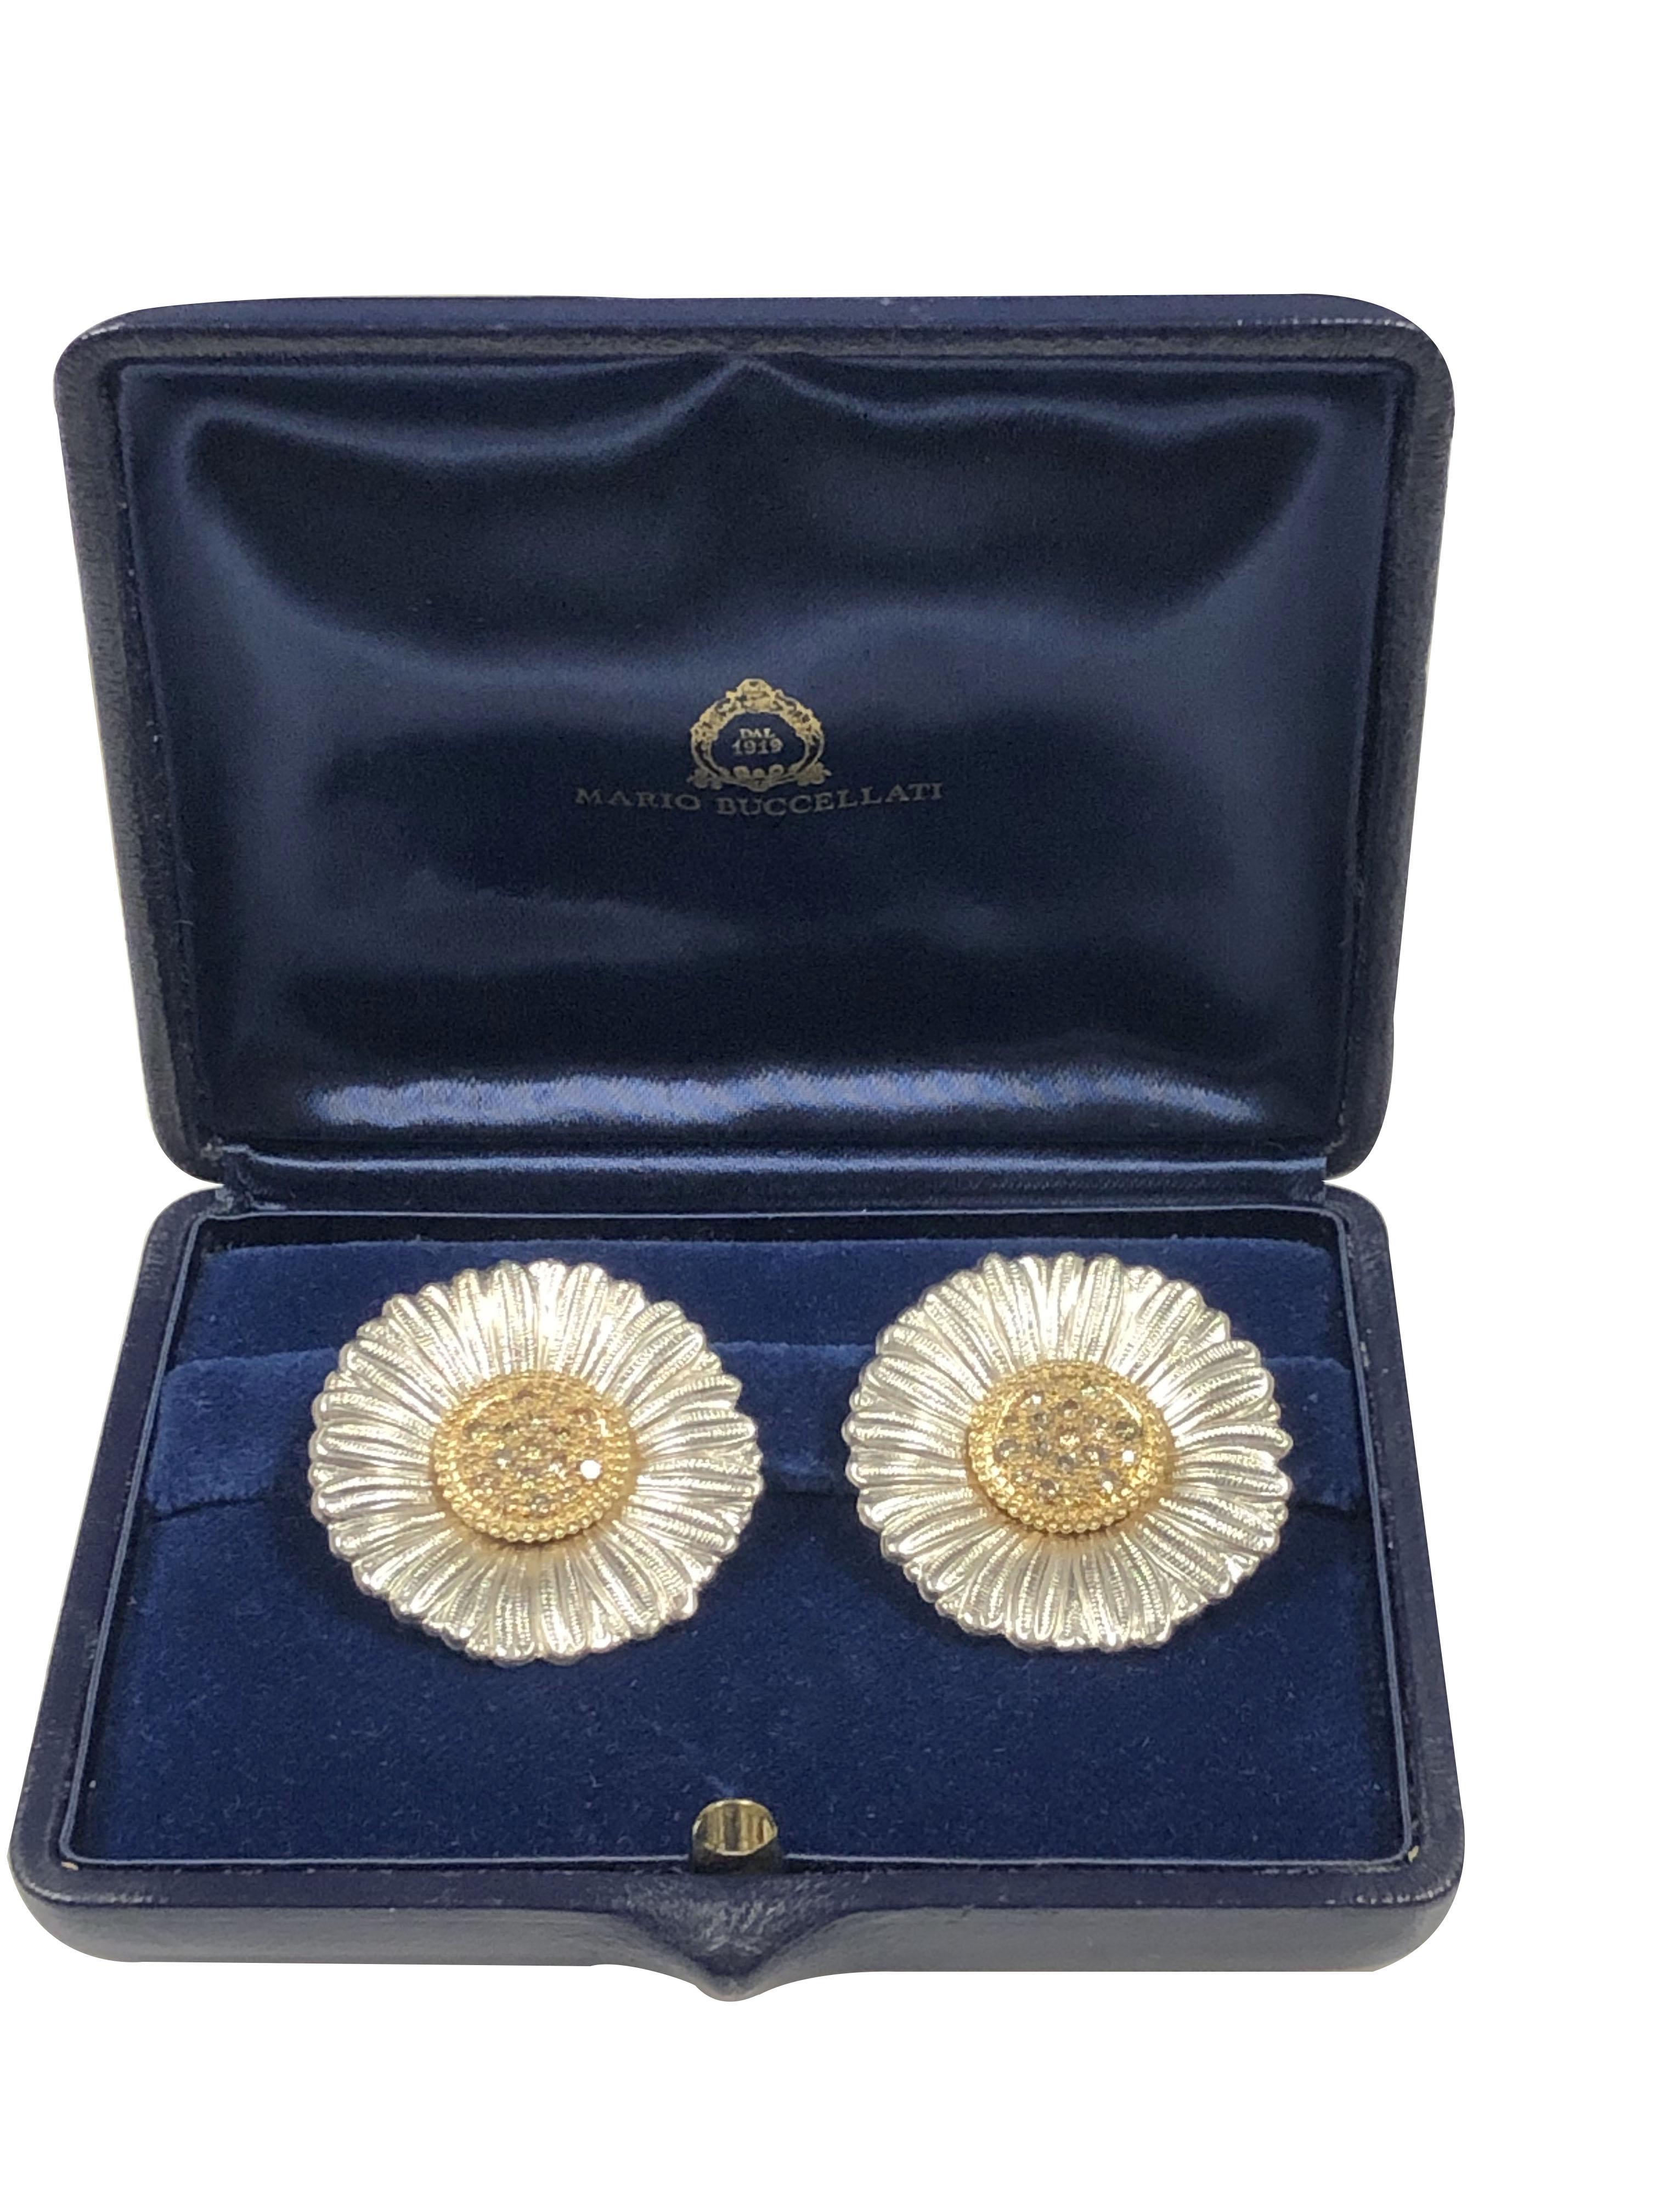 Circa 2010 Buccellati Large Daisy Flower Earrings, measuring 1 1/4 inches in diameter, Gold center and set with brown Round Brilliant cut Diamonds totaling 1 Carat. Pots and these come in the original Presentation Box. 